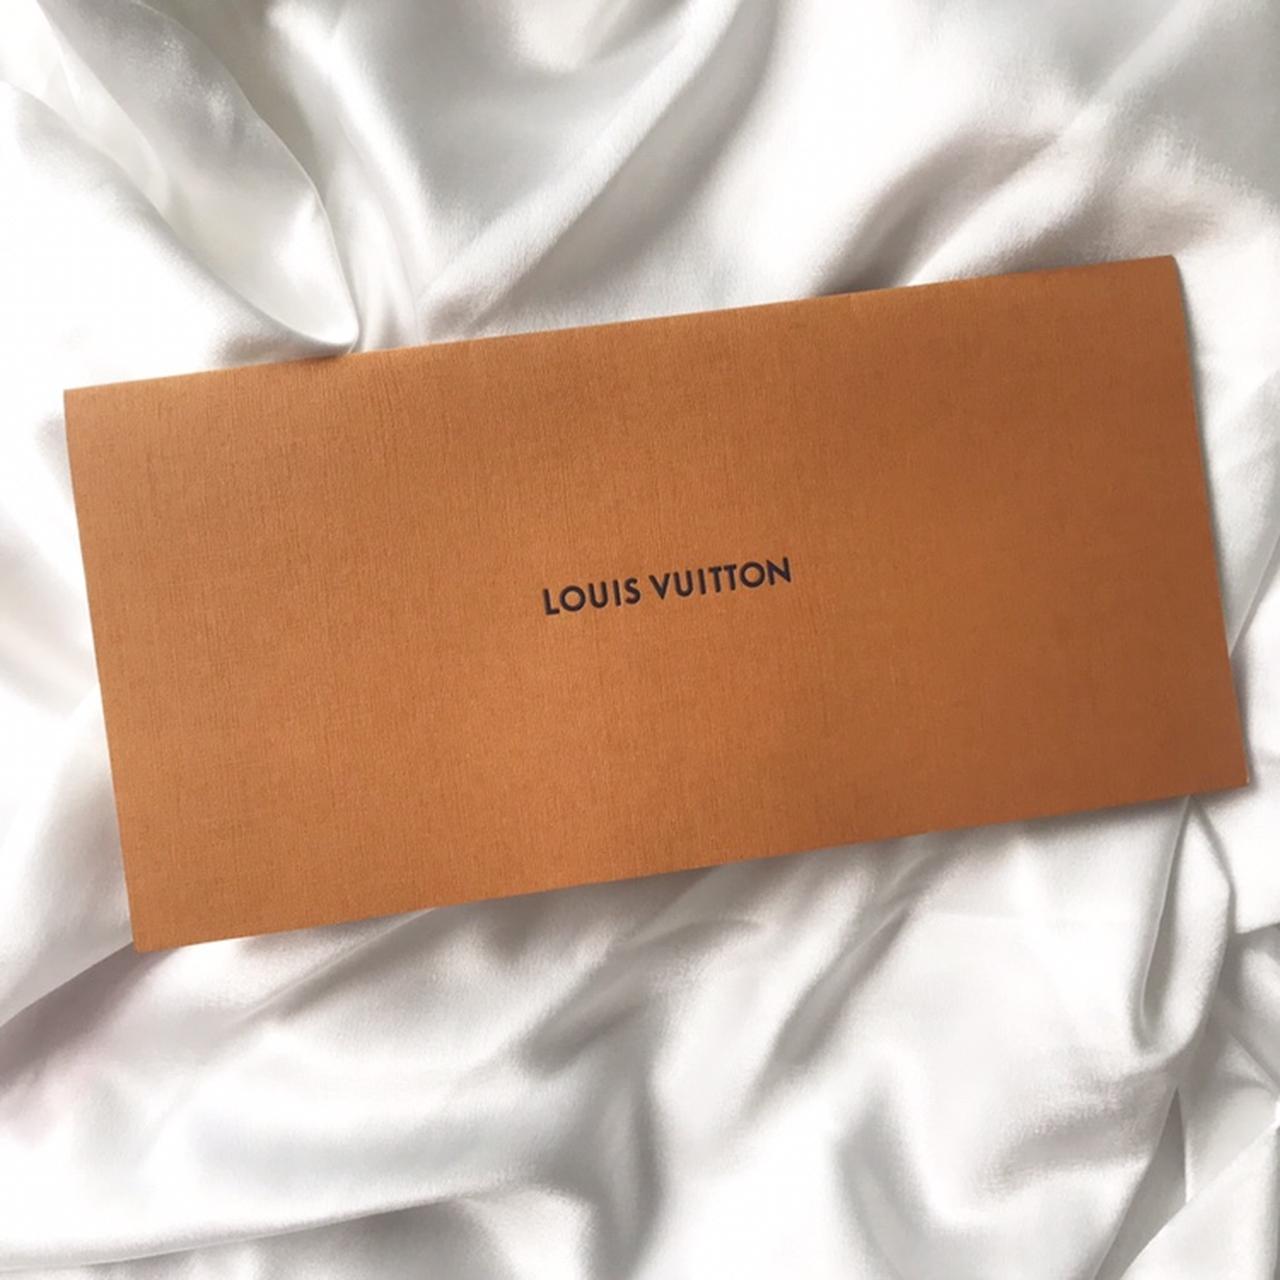 The new #louisvuitton receipt folder. Used to come in mail-like envelope